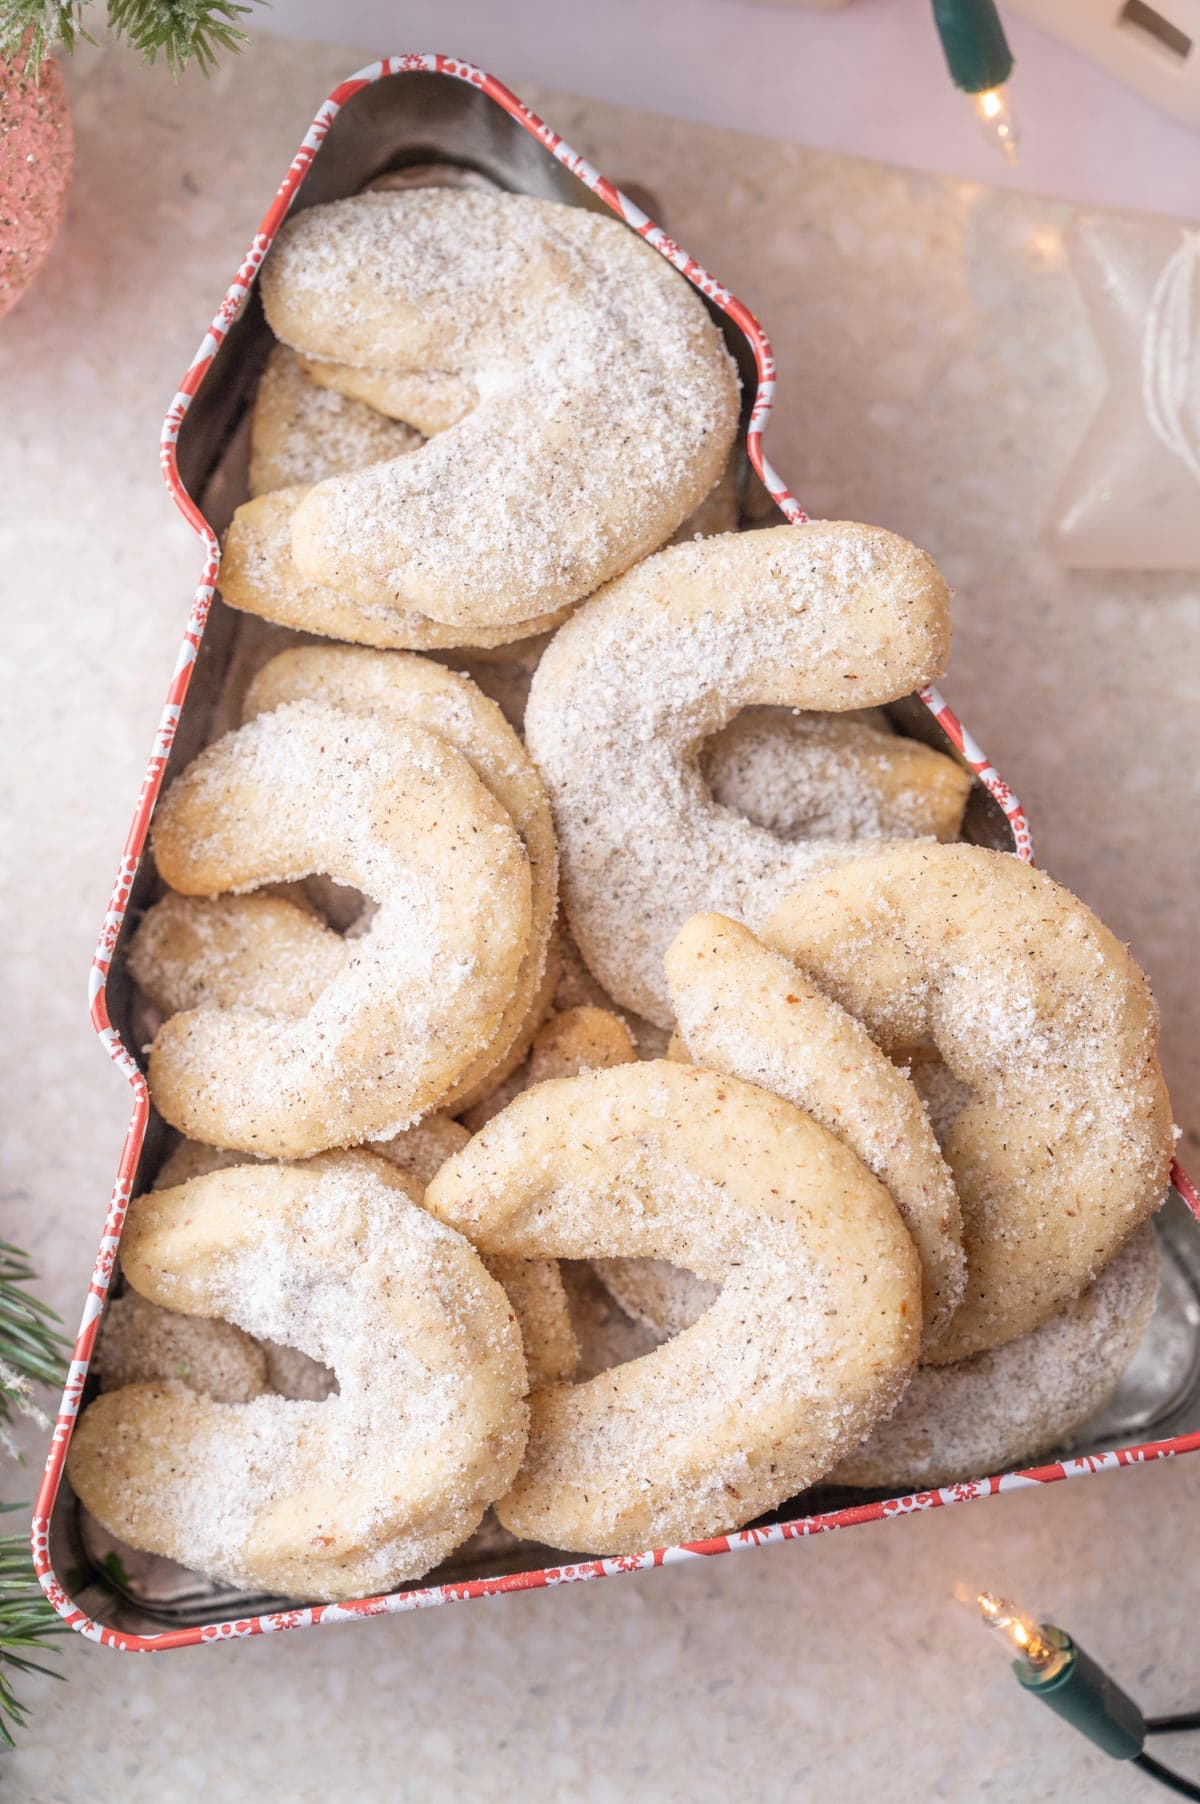 Vanillekipferl in a Christmas tree-shaped cookie tin.